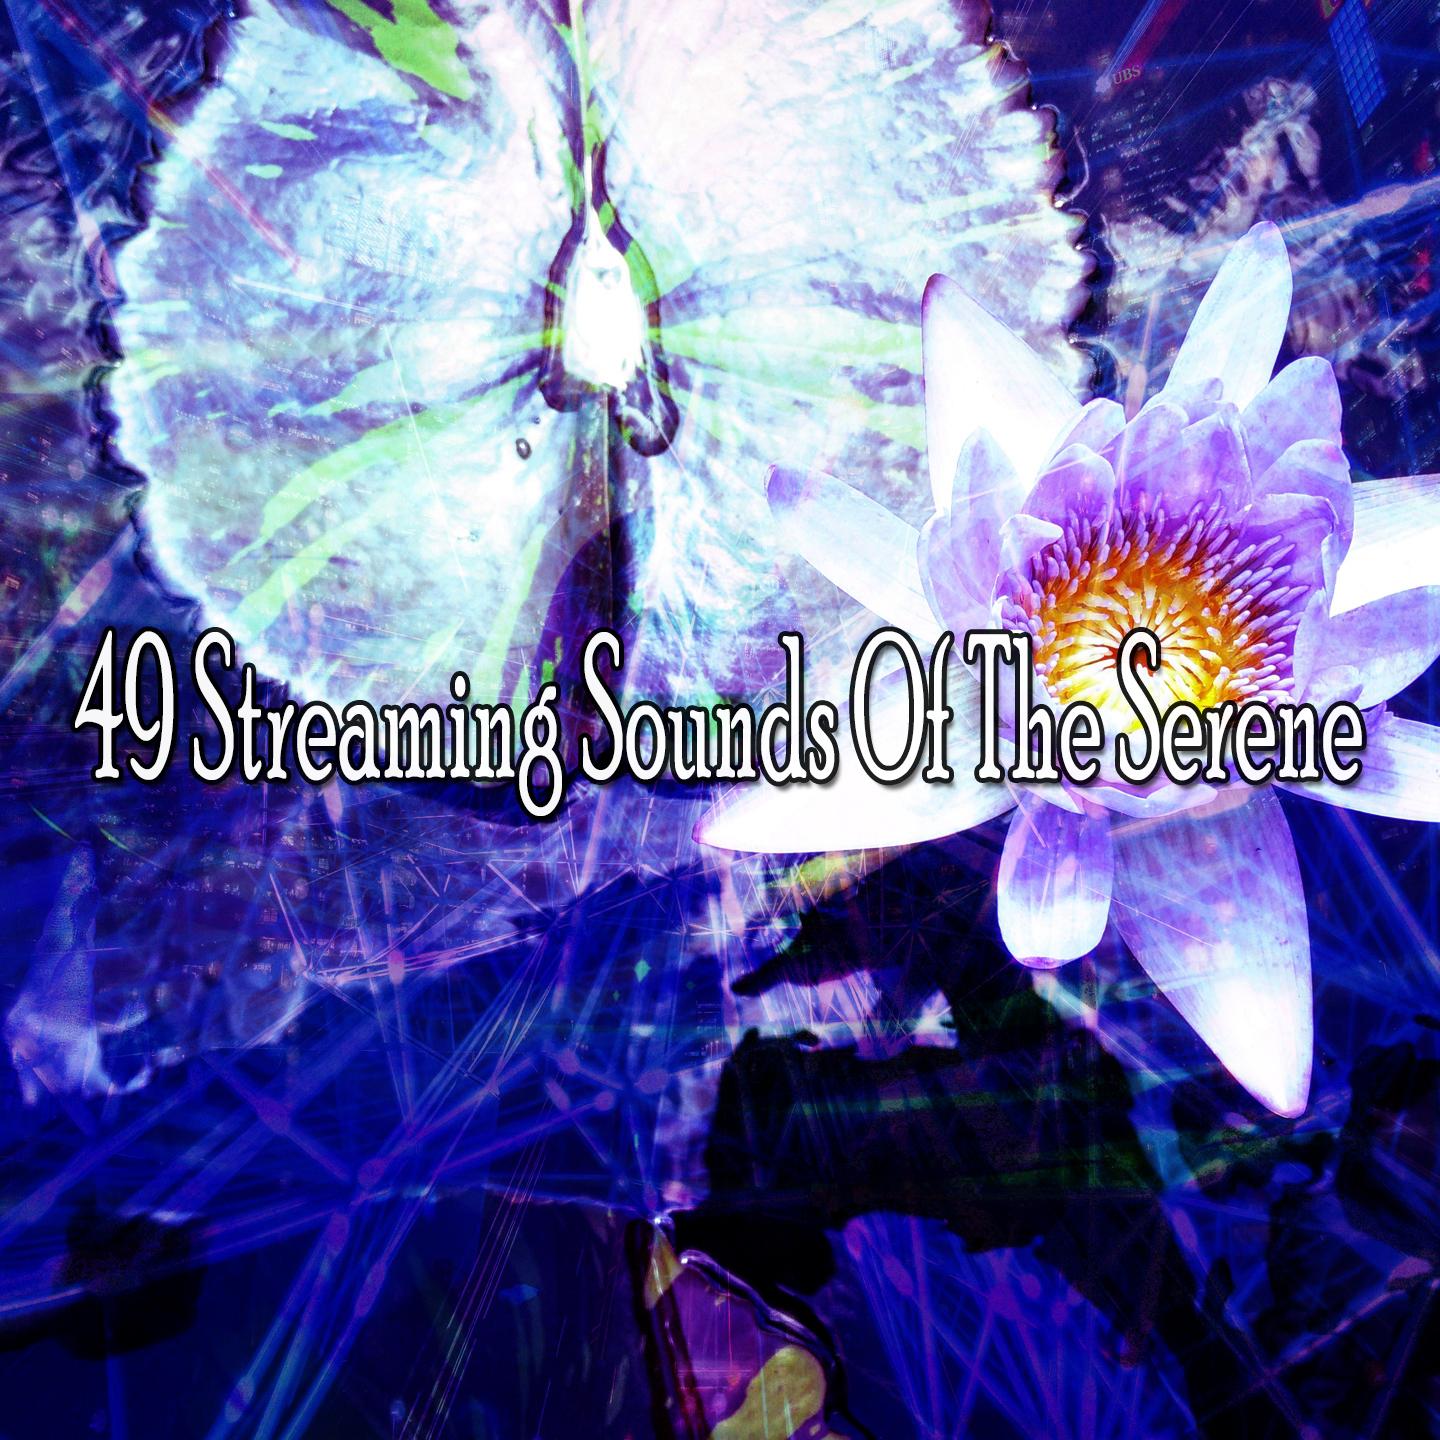 49 Streaming Sounds of the Serene